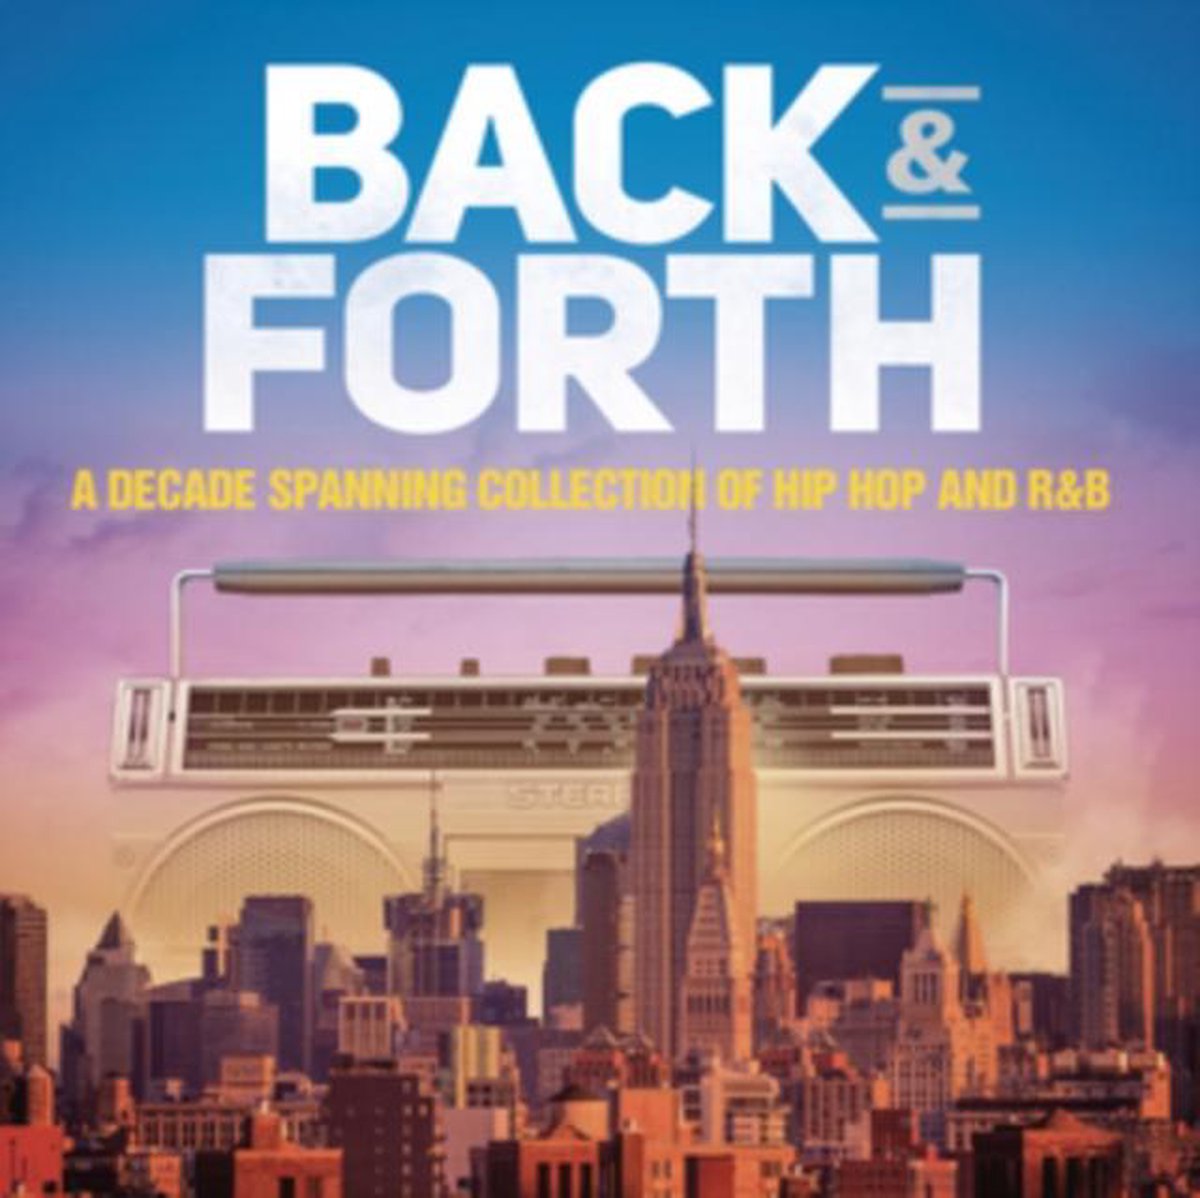 Back & Forth: A Decade Spanning Collection of Hip Hop and R&B |  image23